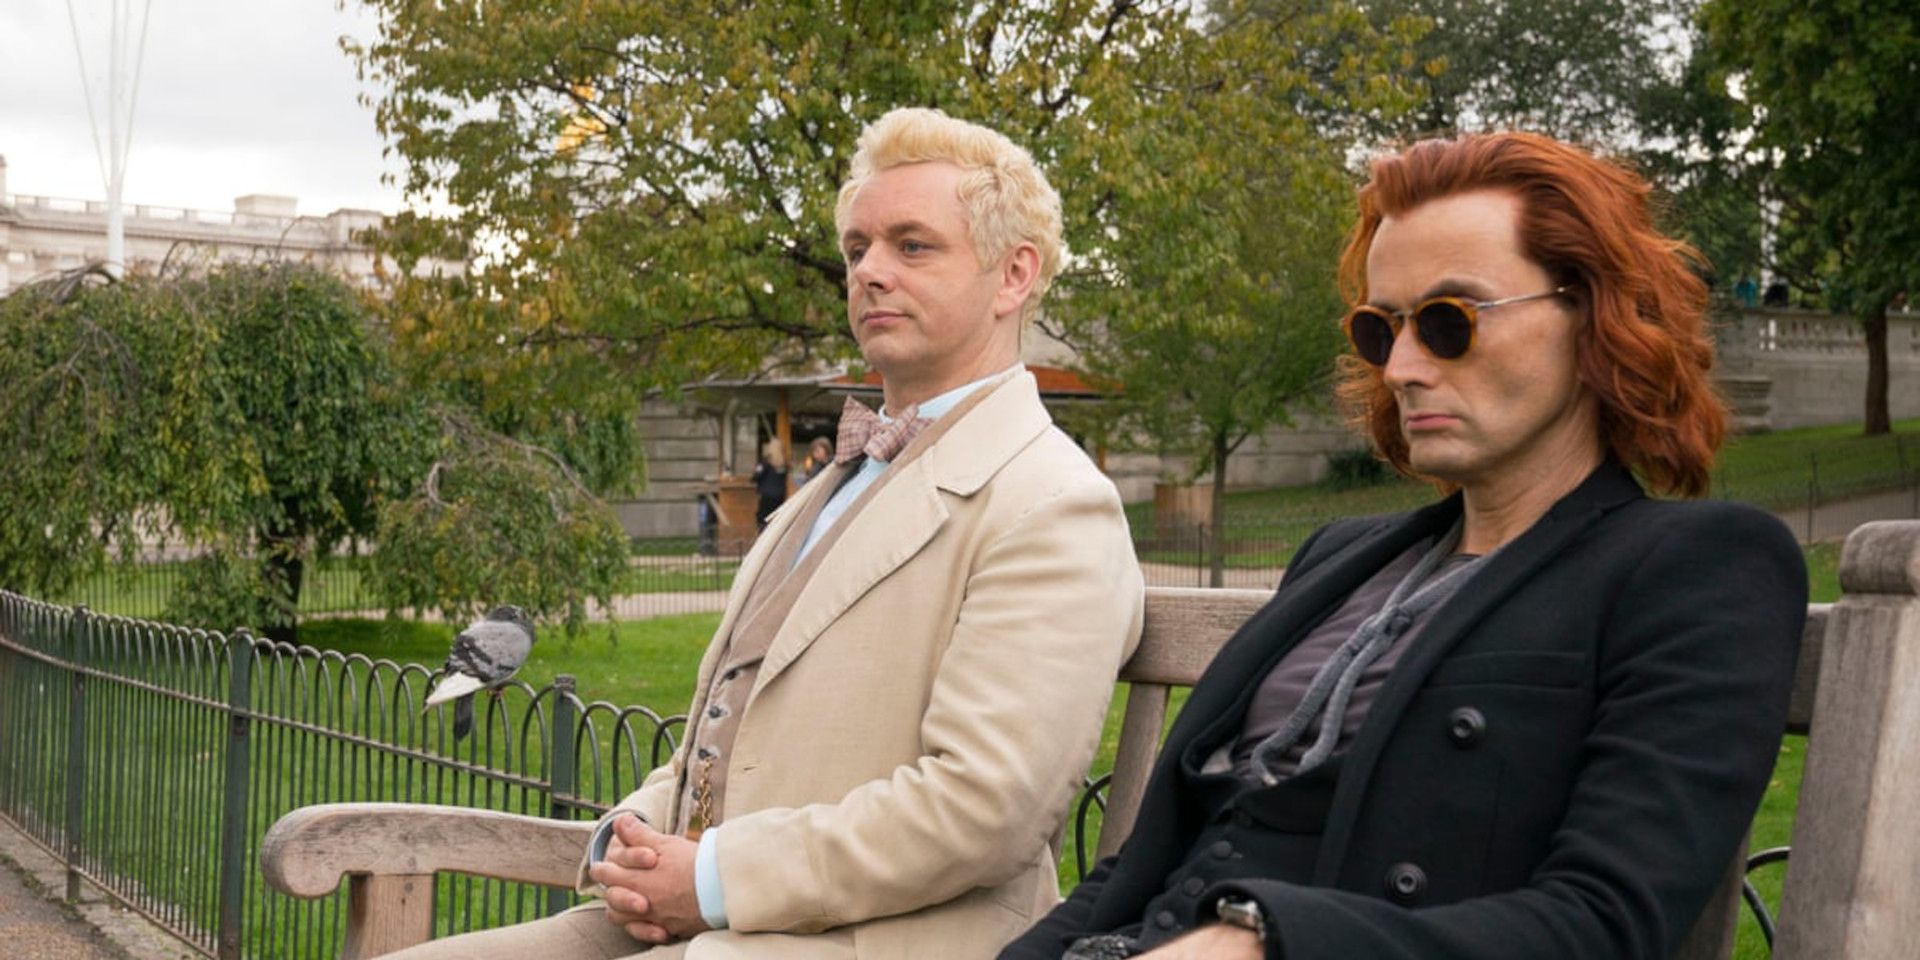 michael sheen and david tennant in good omens as aziraphale and crowley on a bench